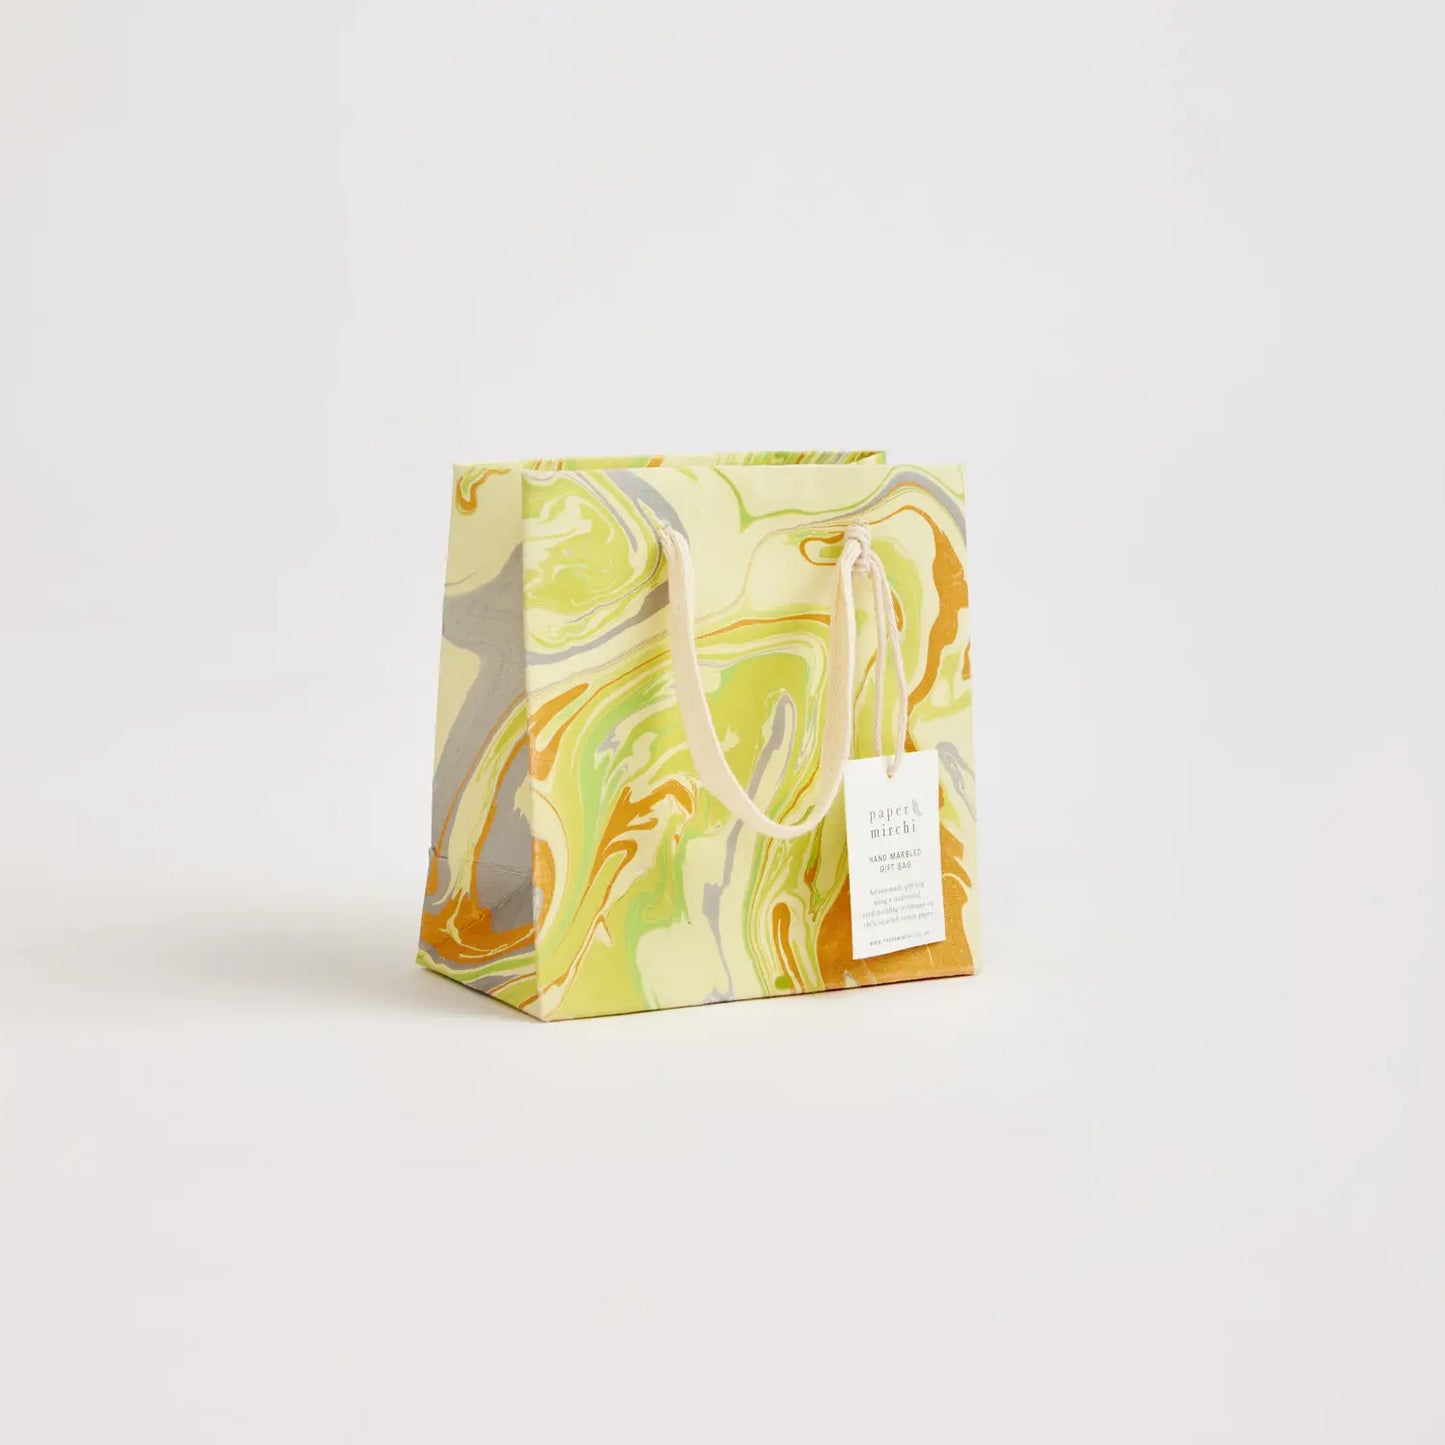 Small Hand Marbled Gift Bag in Pastel By Paper Mirchi